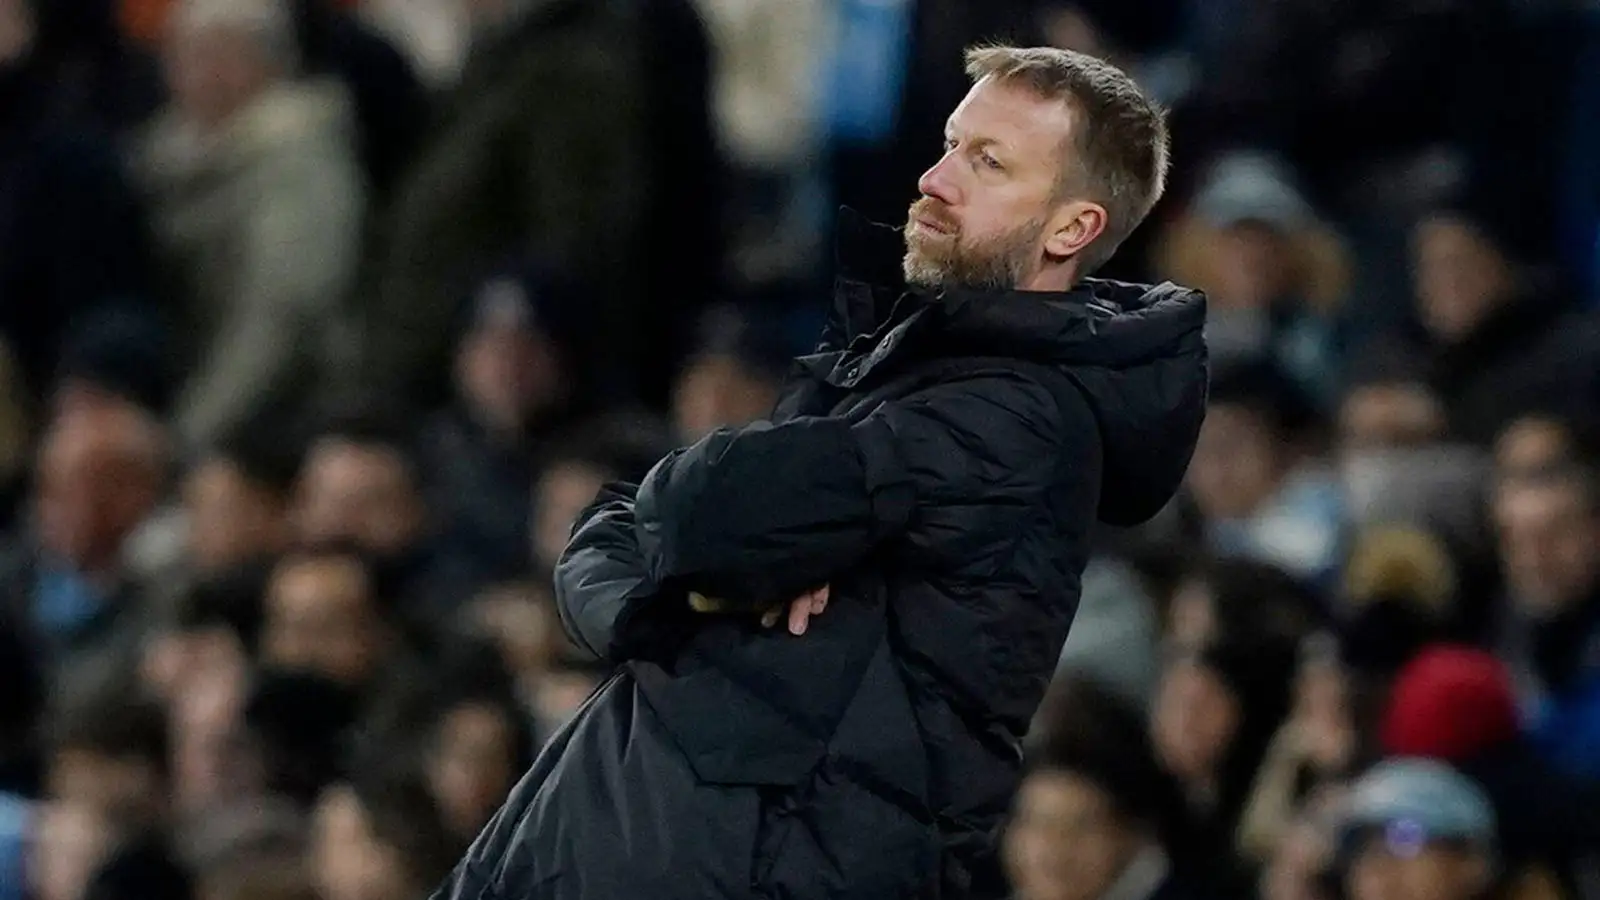 Watch: ‘F*ck me!’ Graham Potter’s hilarious reaction to Chelsea blunder